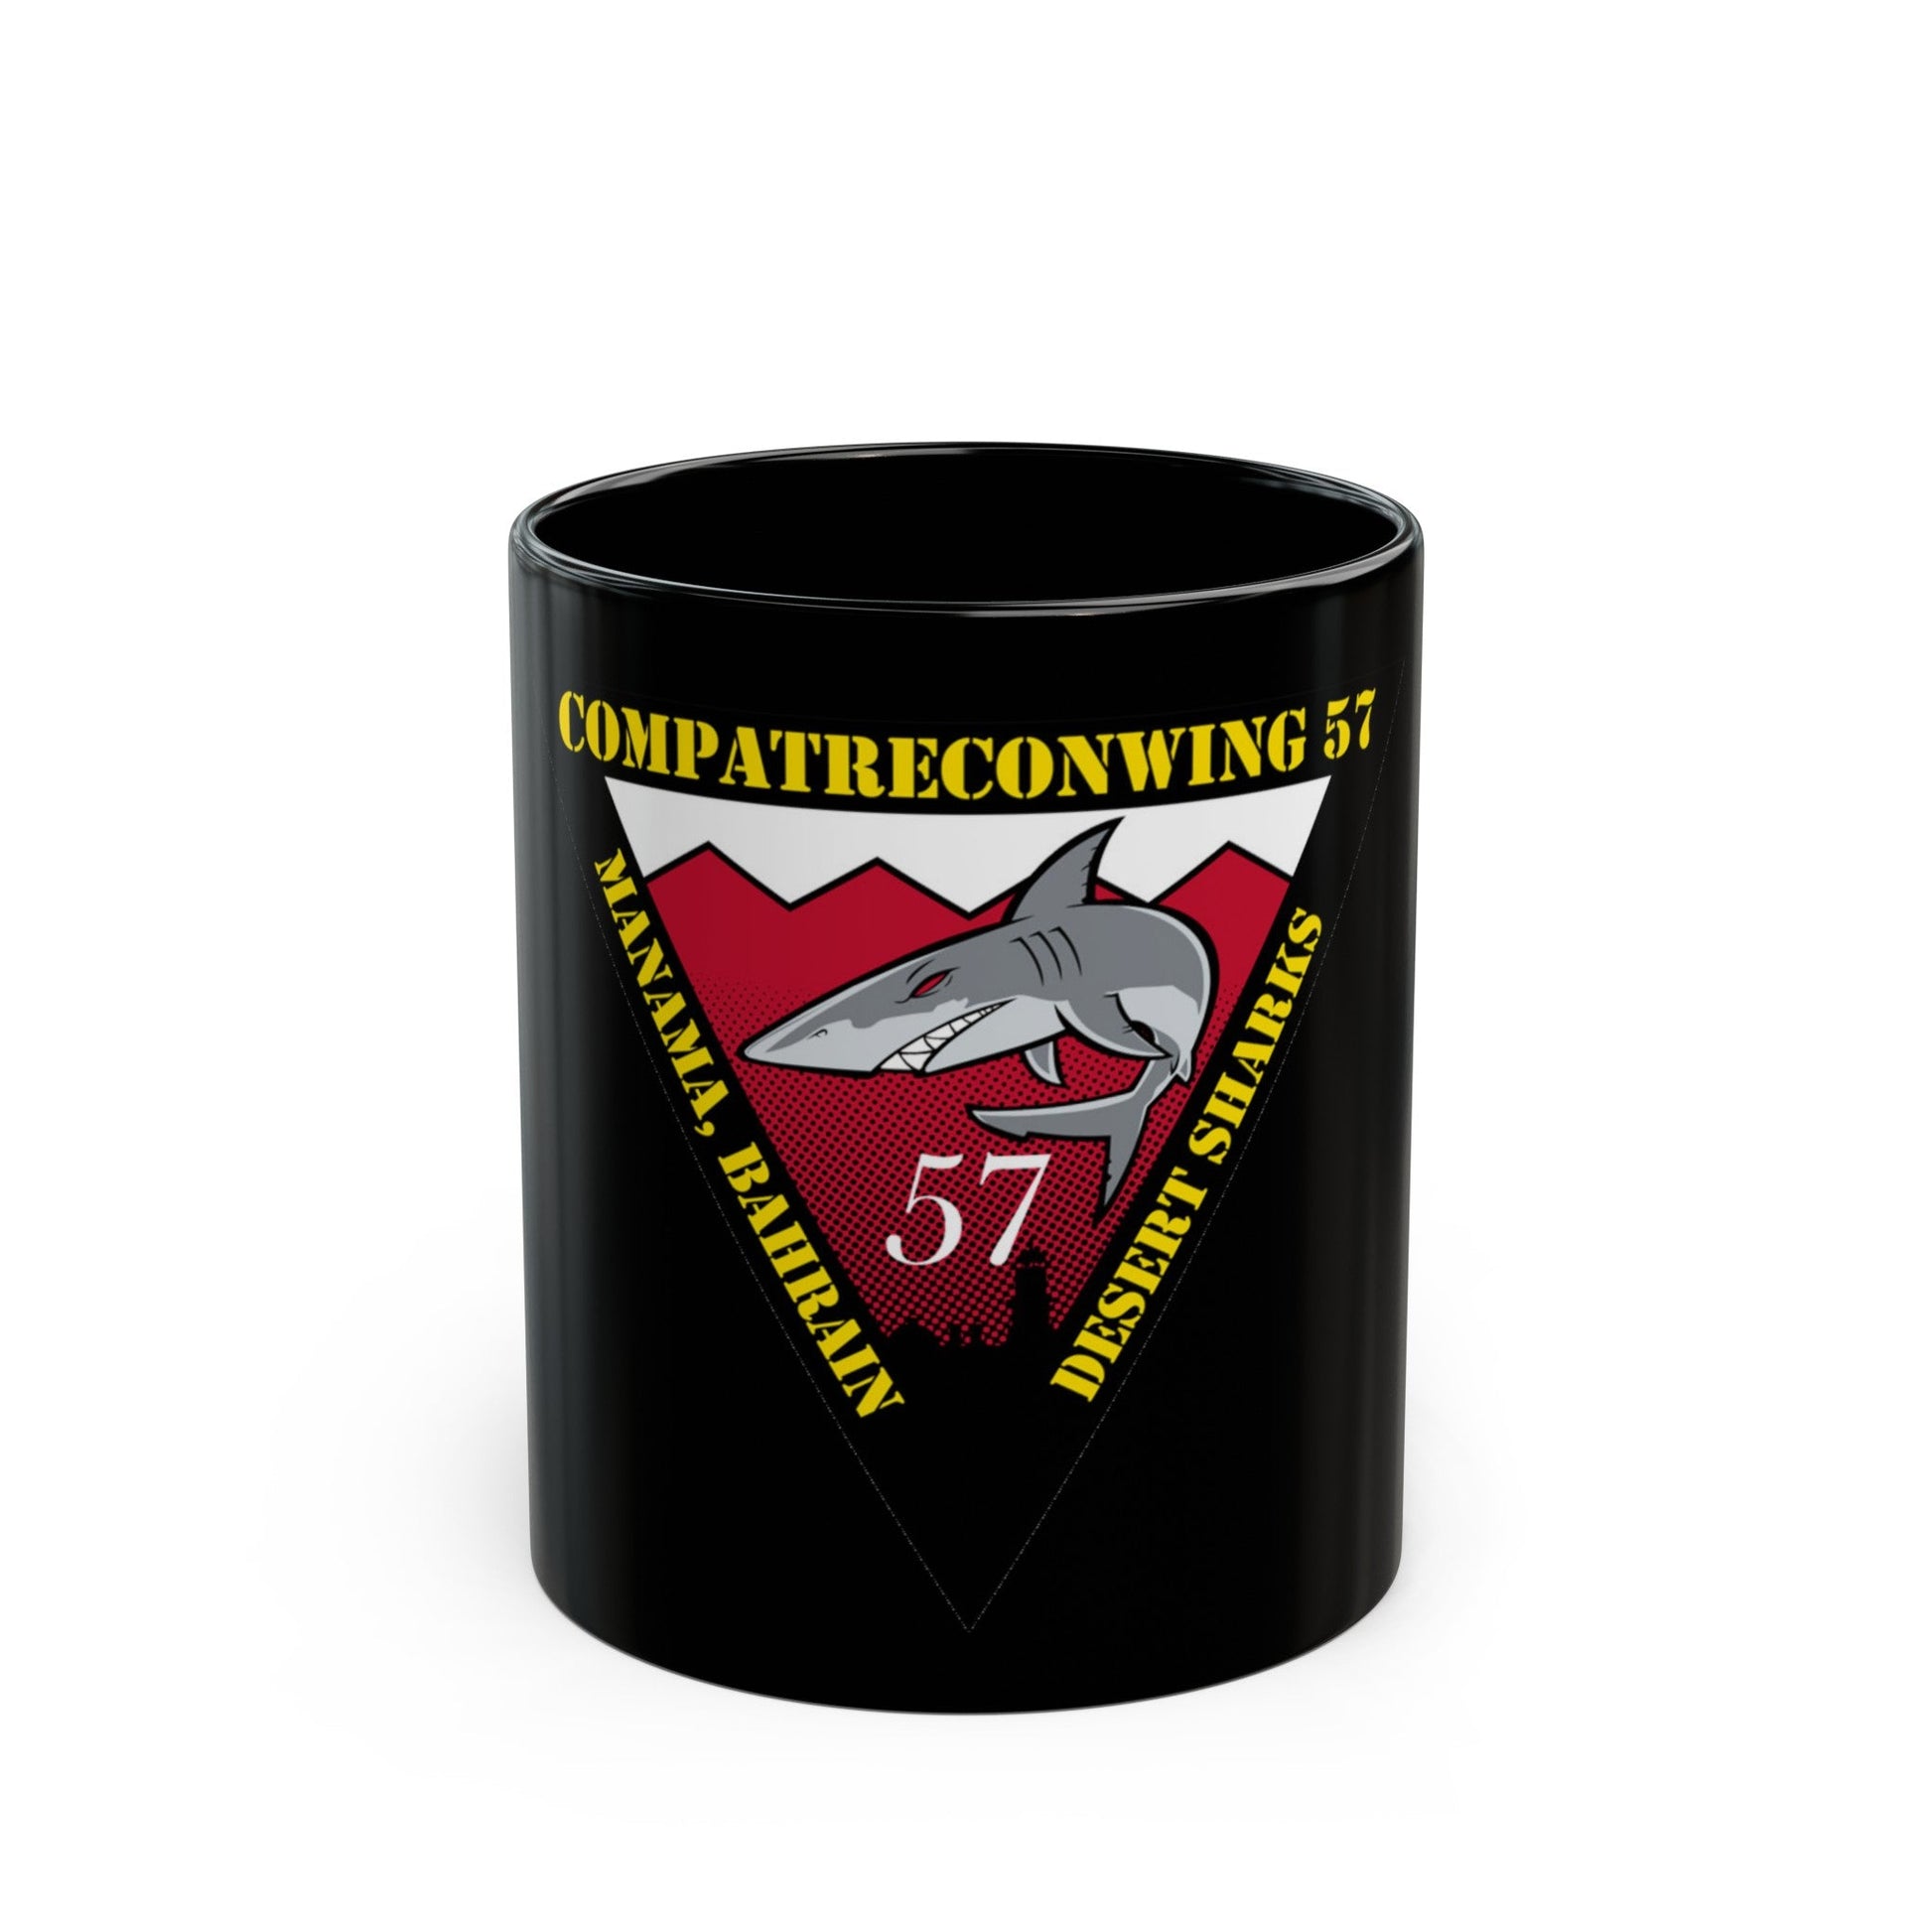 COMPATRECONWING 57 Commander Patrol and Reconnaissance Wing 57 (U.S. Navy) Black Coffee Mug-11oz-The Sticker Space